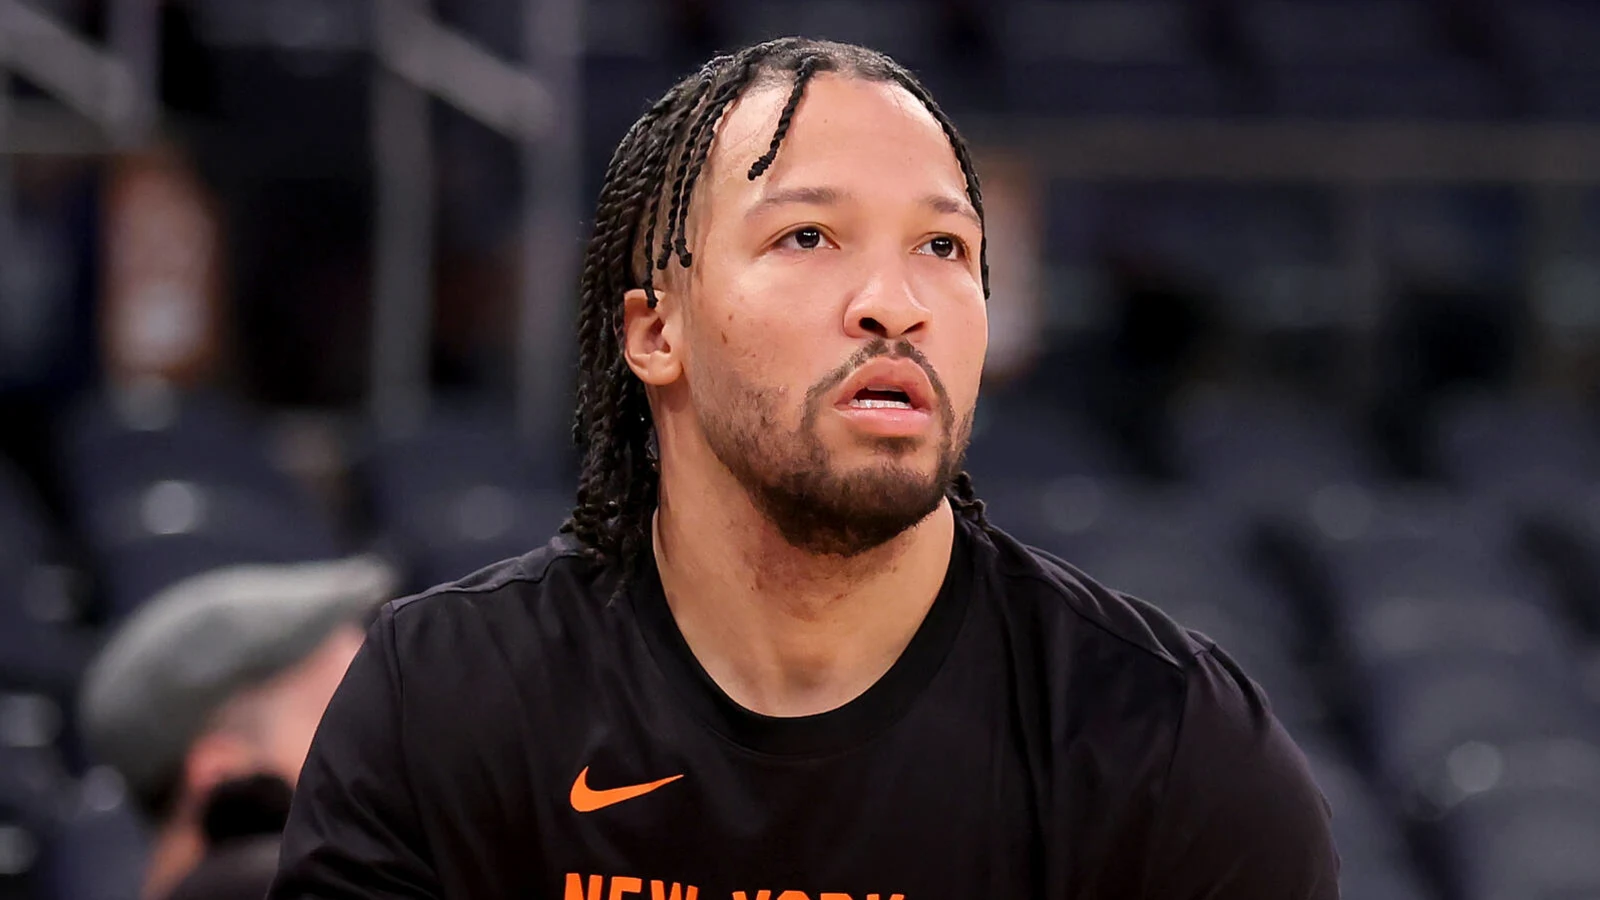 Jalen Brunson's Injury: A Silver Lining for the Knicks Amid Playoff Hopes